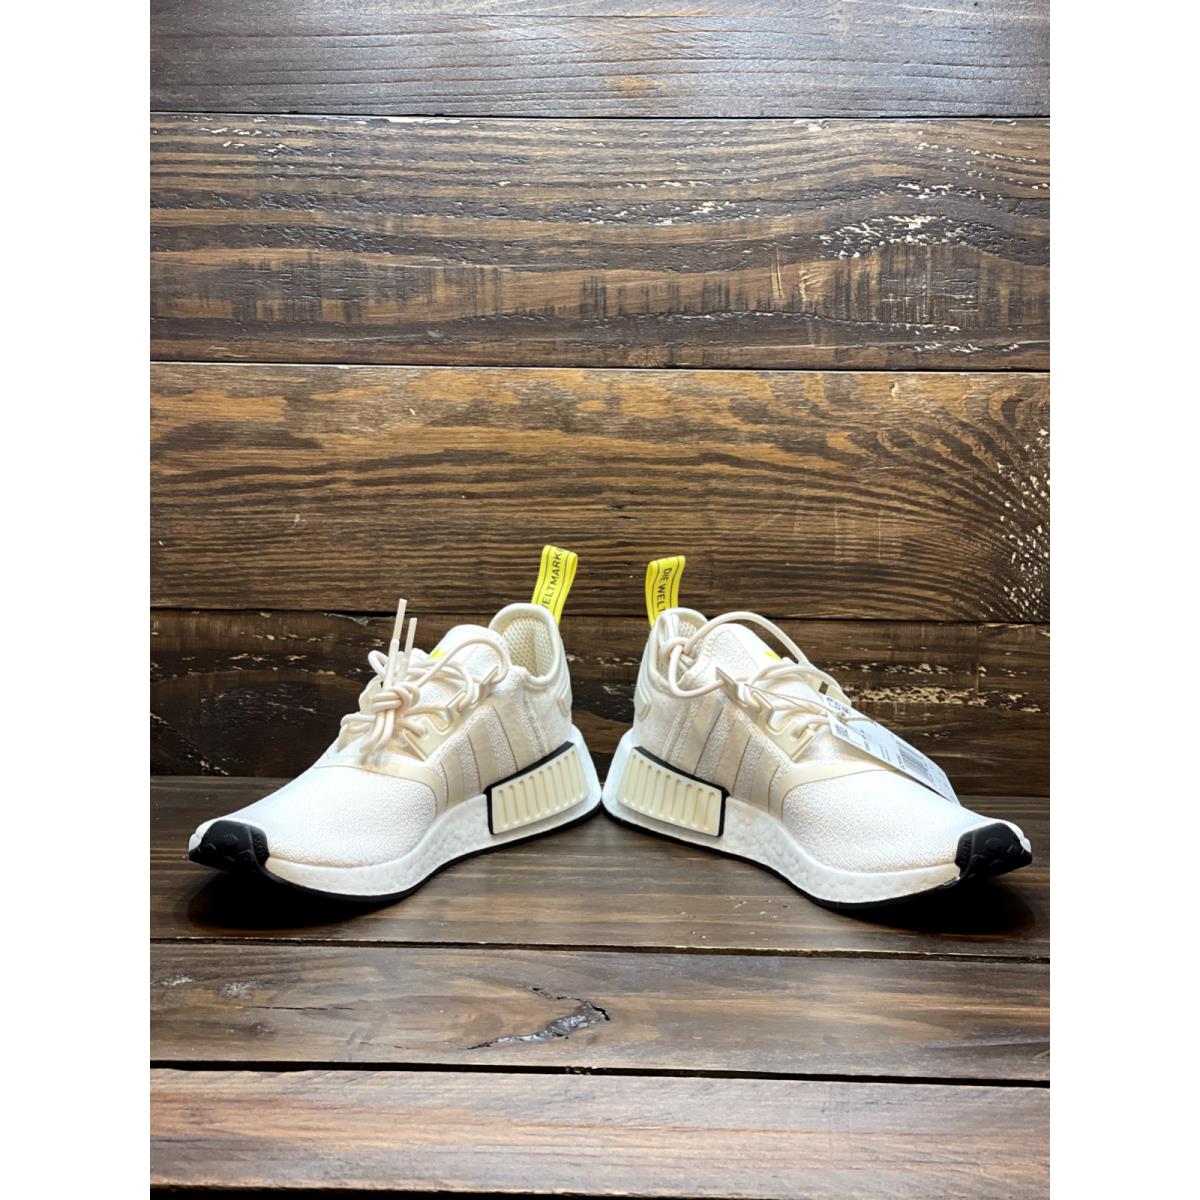 Adidas shoes NMD - Yellow 0